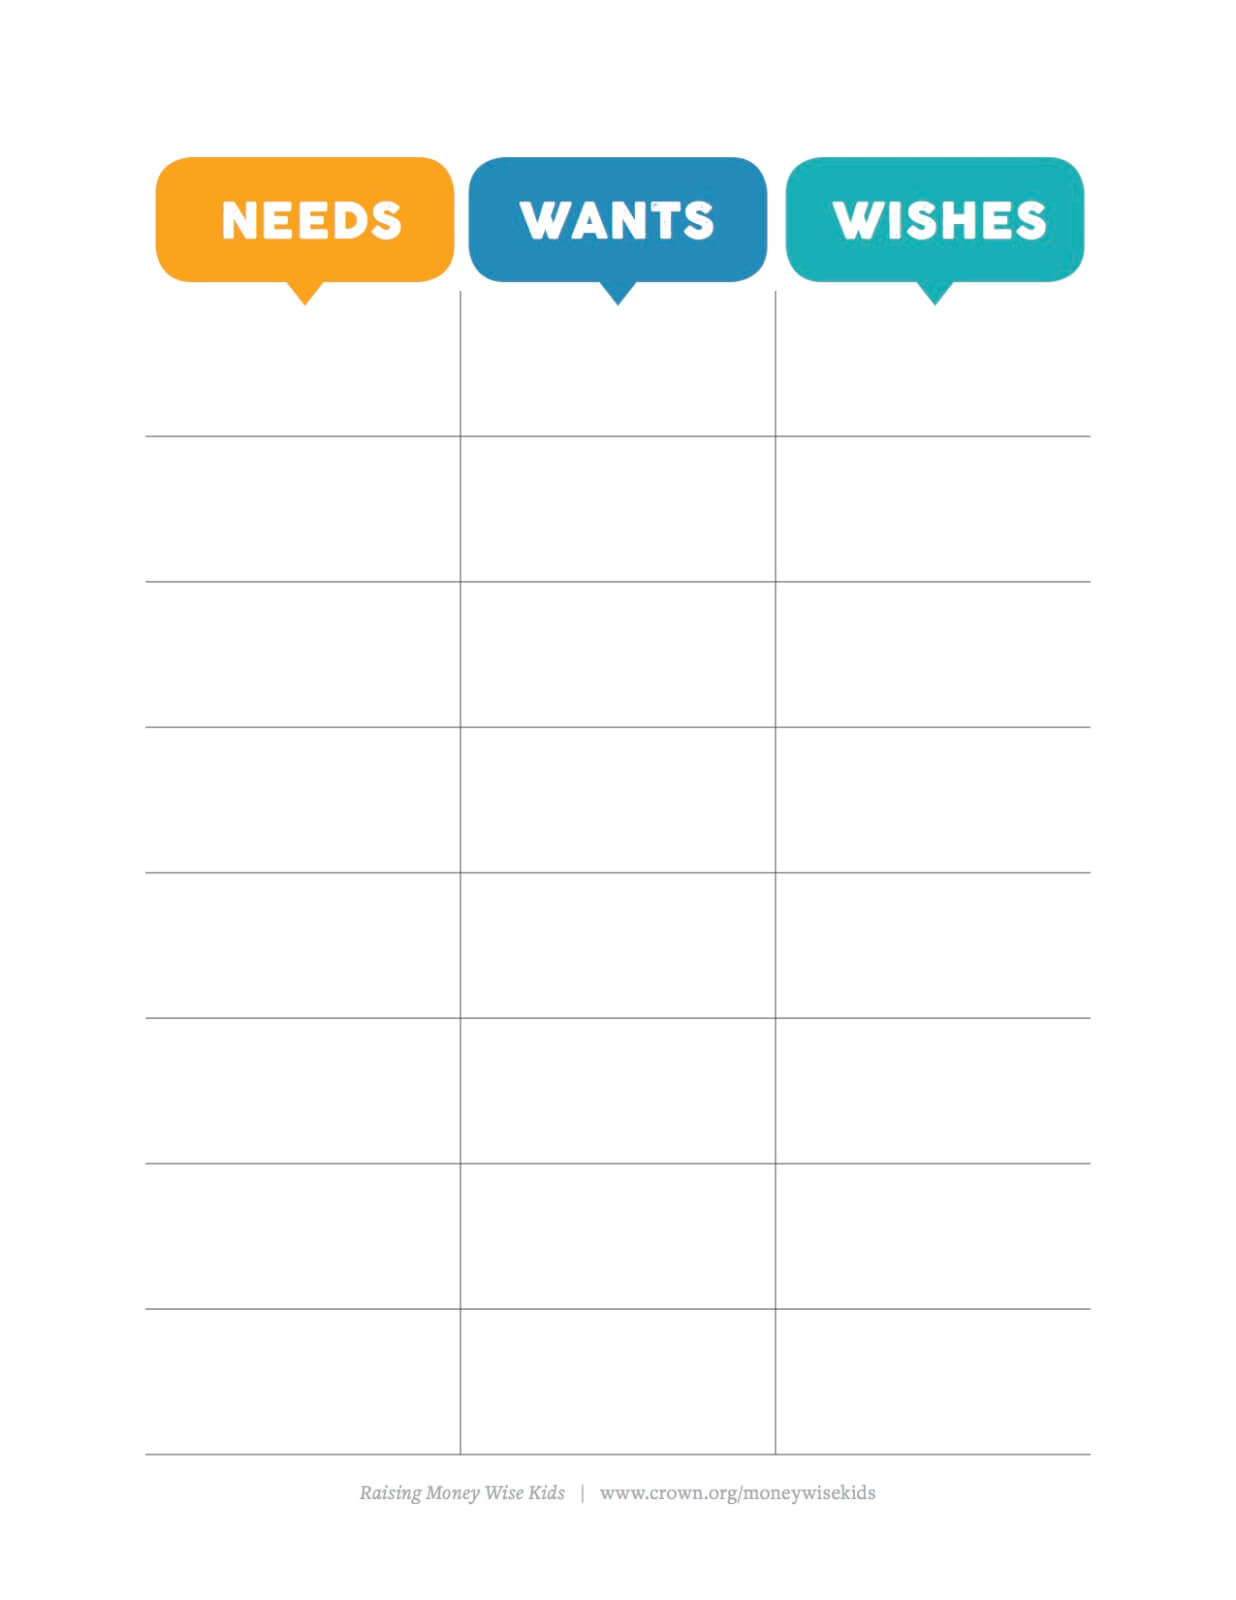 Needs, Wants, and Wishes Chart - Crown.org Intended For Wants Vs Needs Worksheet